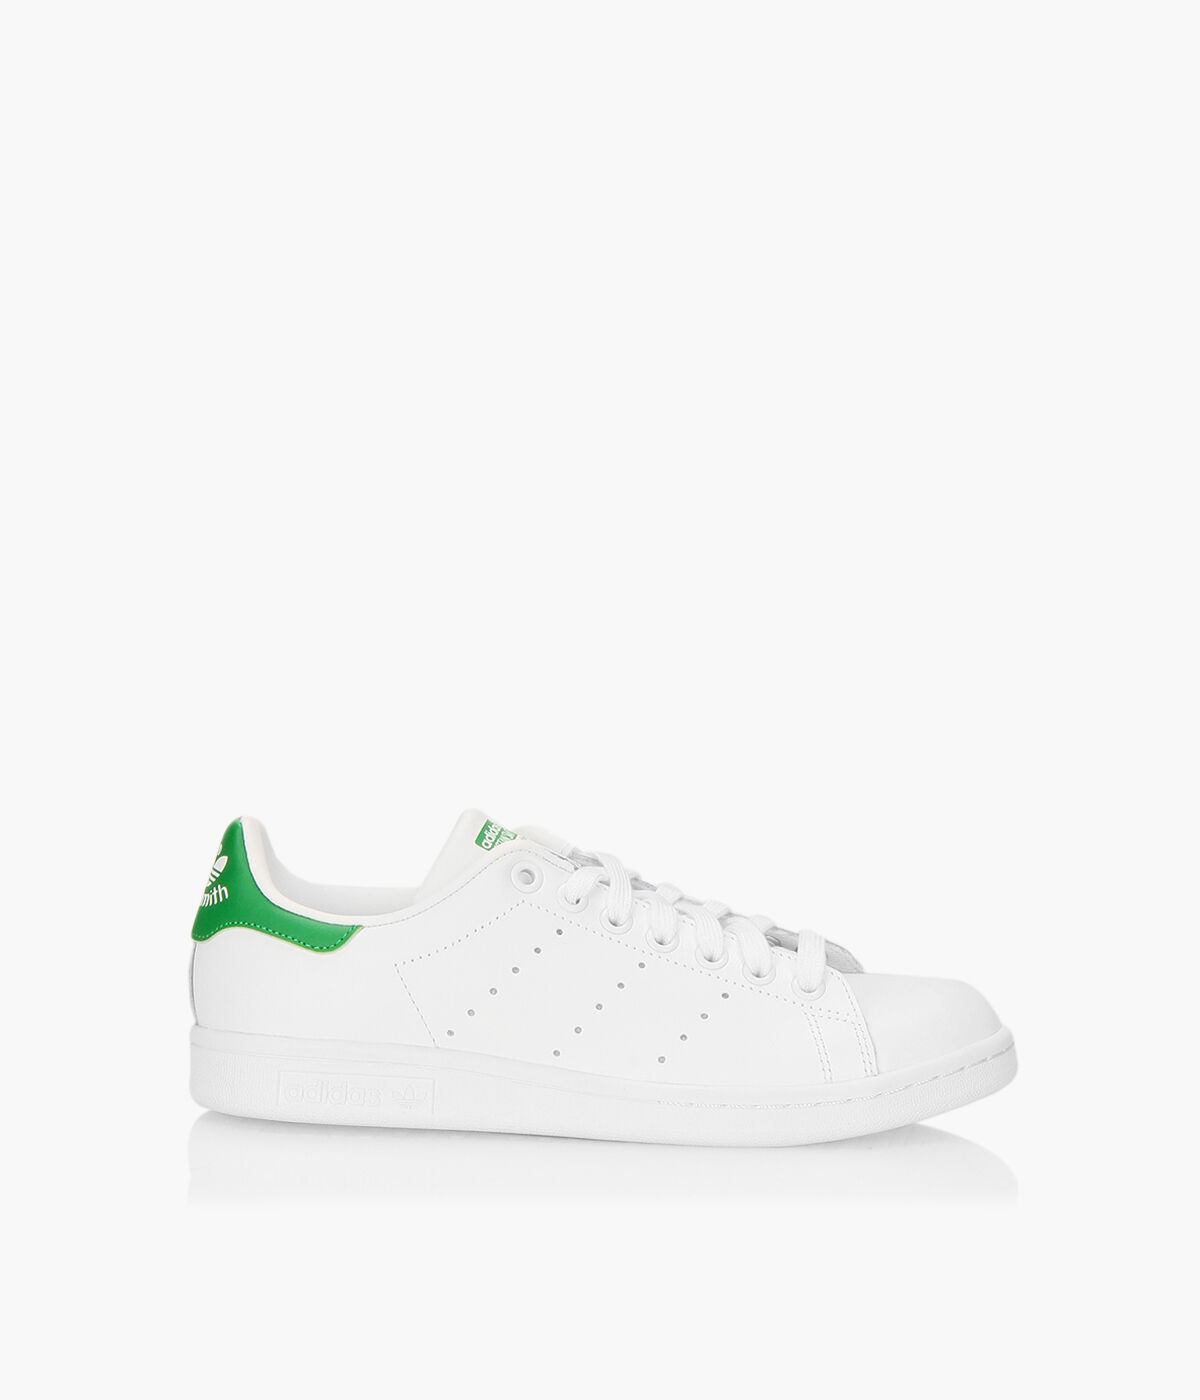 stan smith adidas shoes